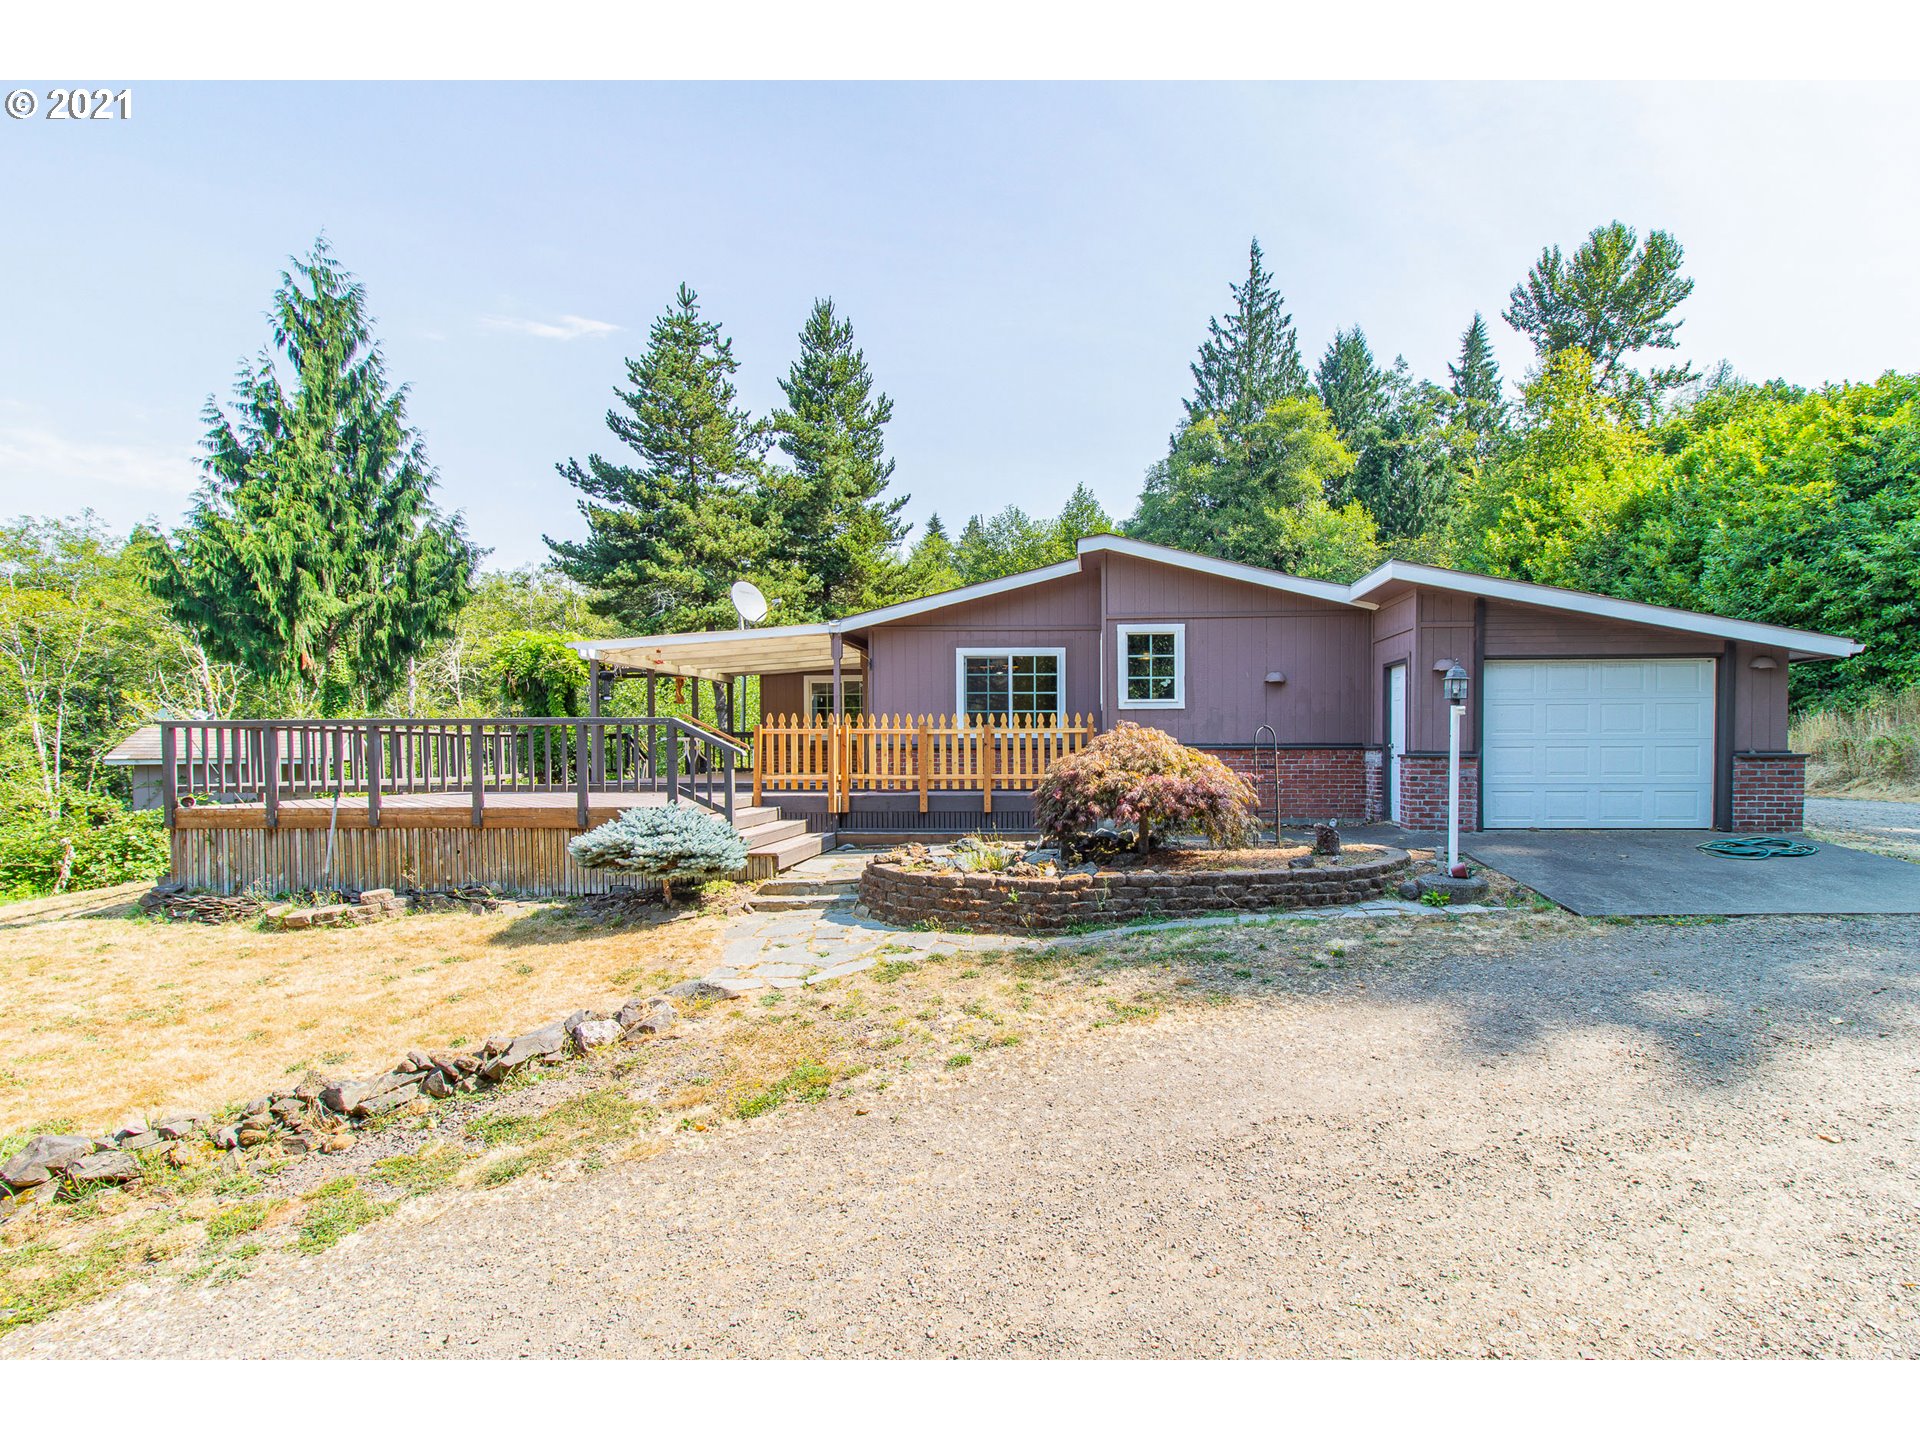 369 ZILLIG RD (1 of 32)